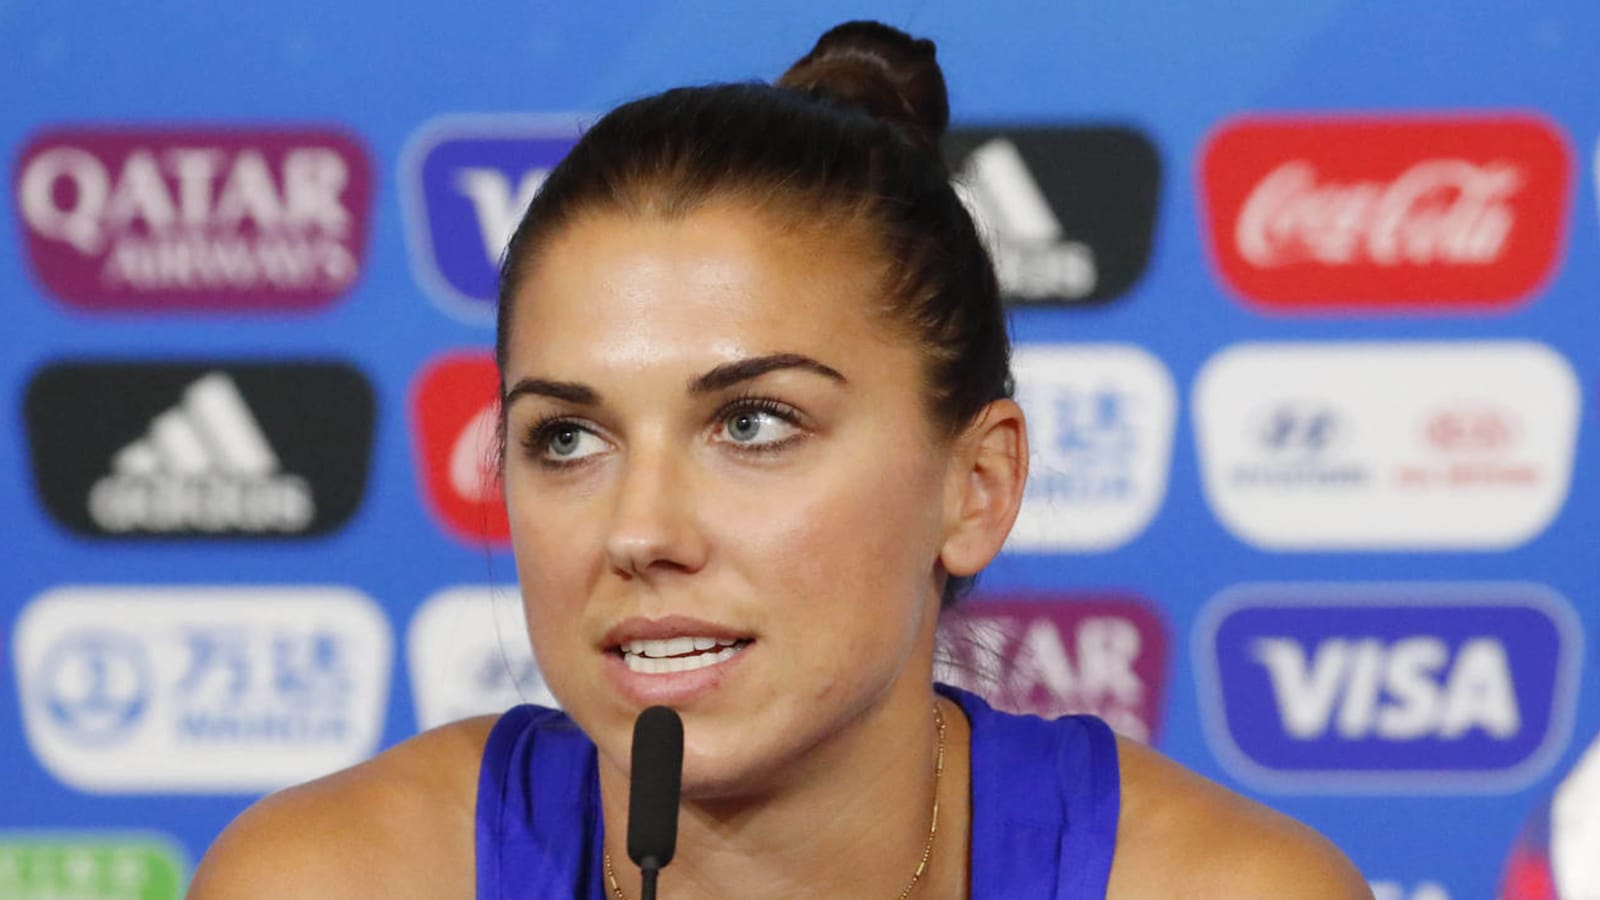 Alex Morgan breaks out ‘sipping tea’ celebration after goal against England